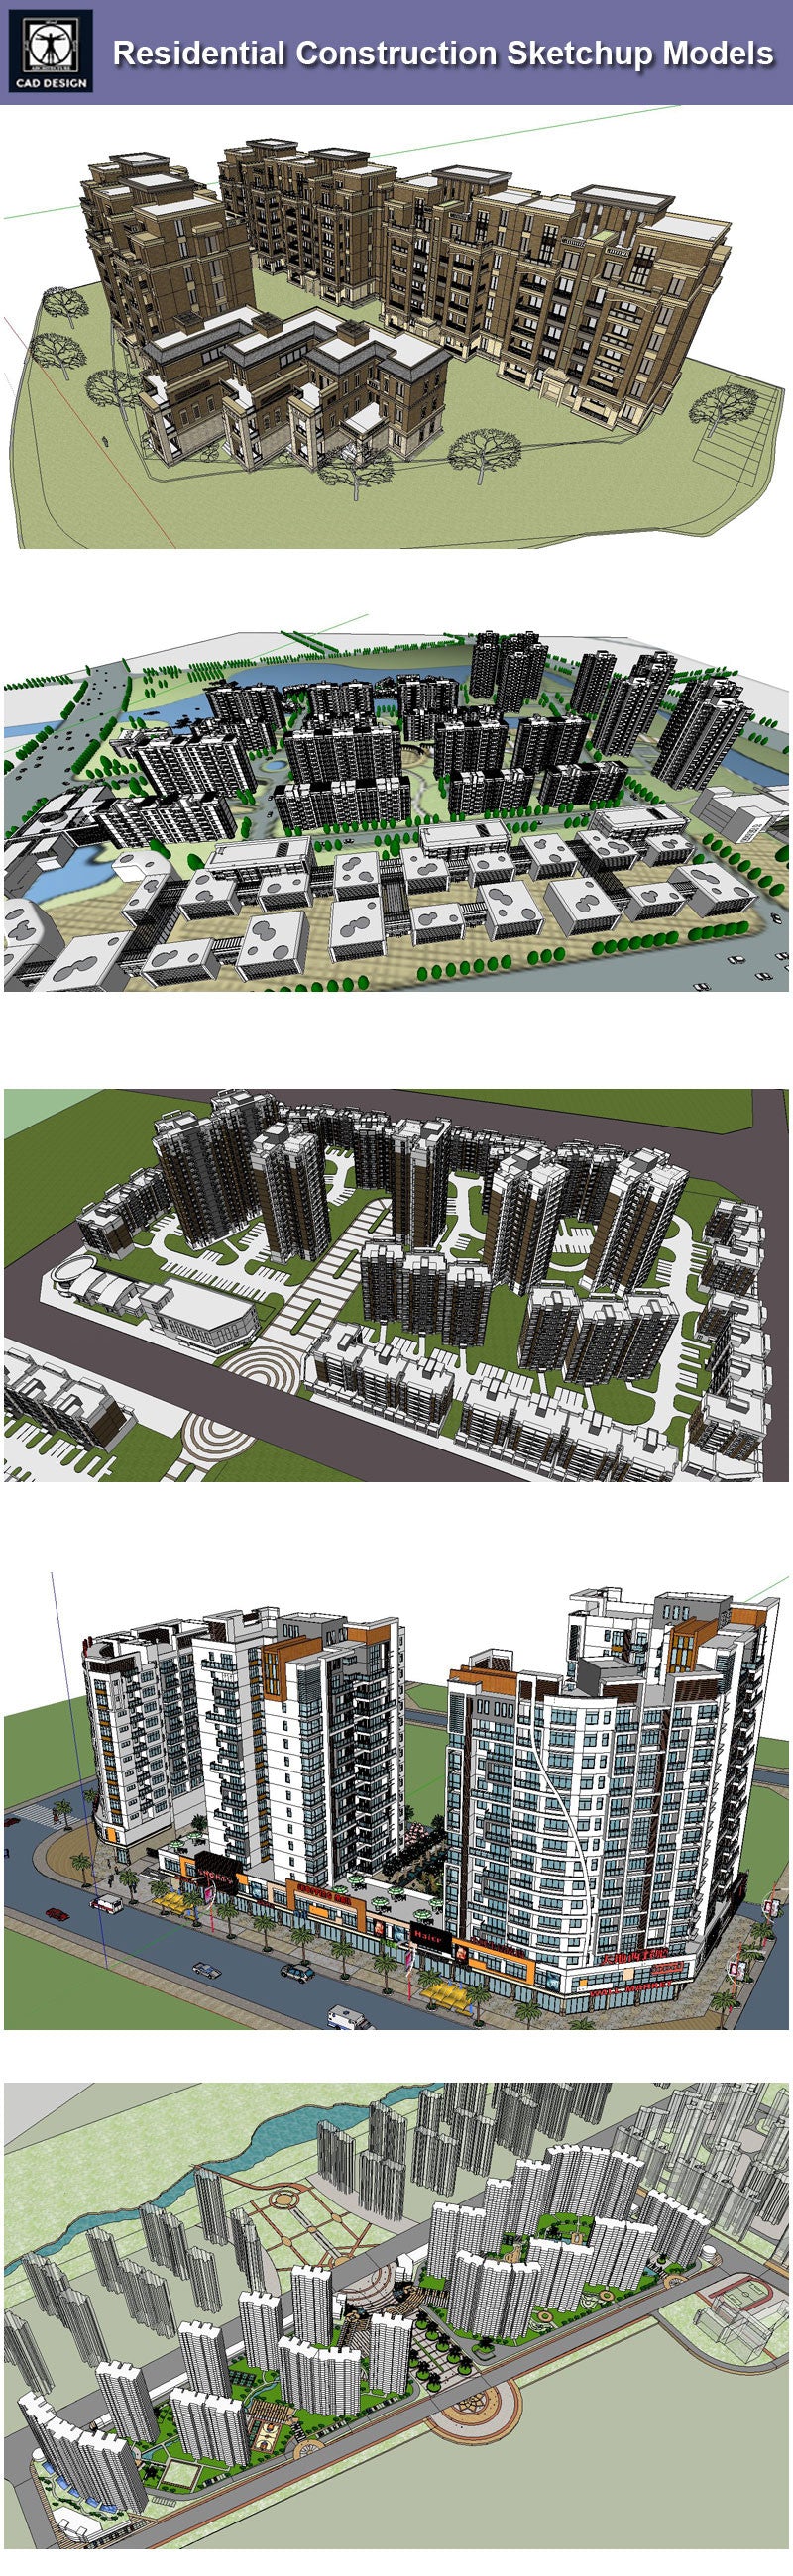 【Download 25 Residential Construction Sketchup 3D Models】 (Recommanded!!)